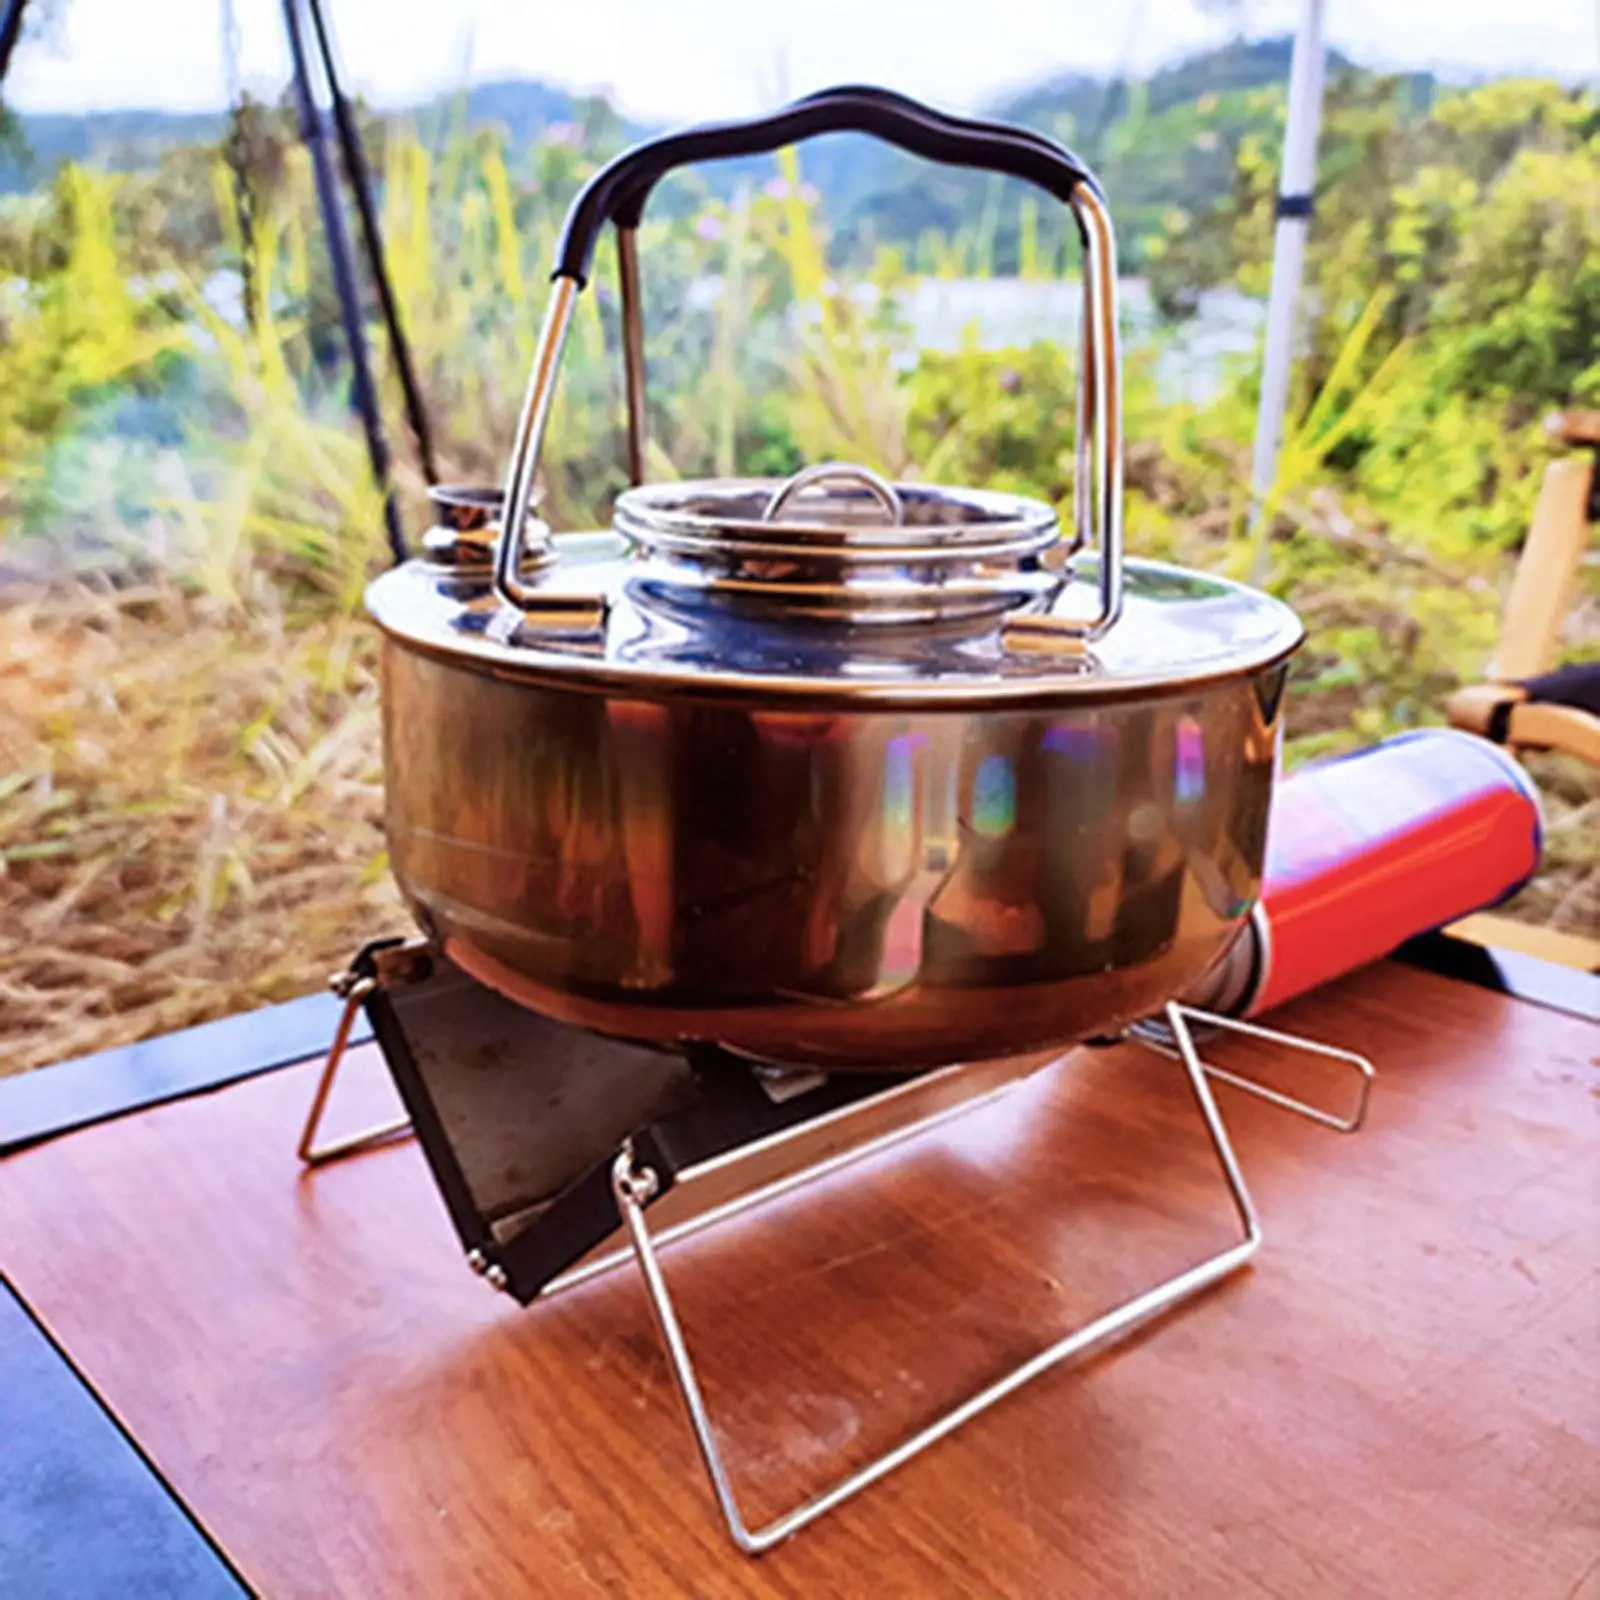 Portable Camping Tea Kettle Tea Pot Water Kettle Campfire Kettle Outdoor Kettle for Hiking Backpacking Outdoor Picnic Kitchen